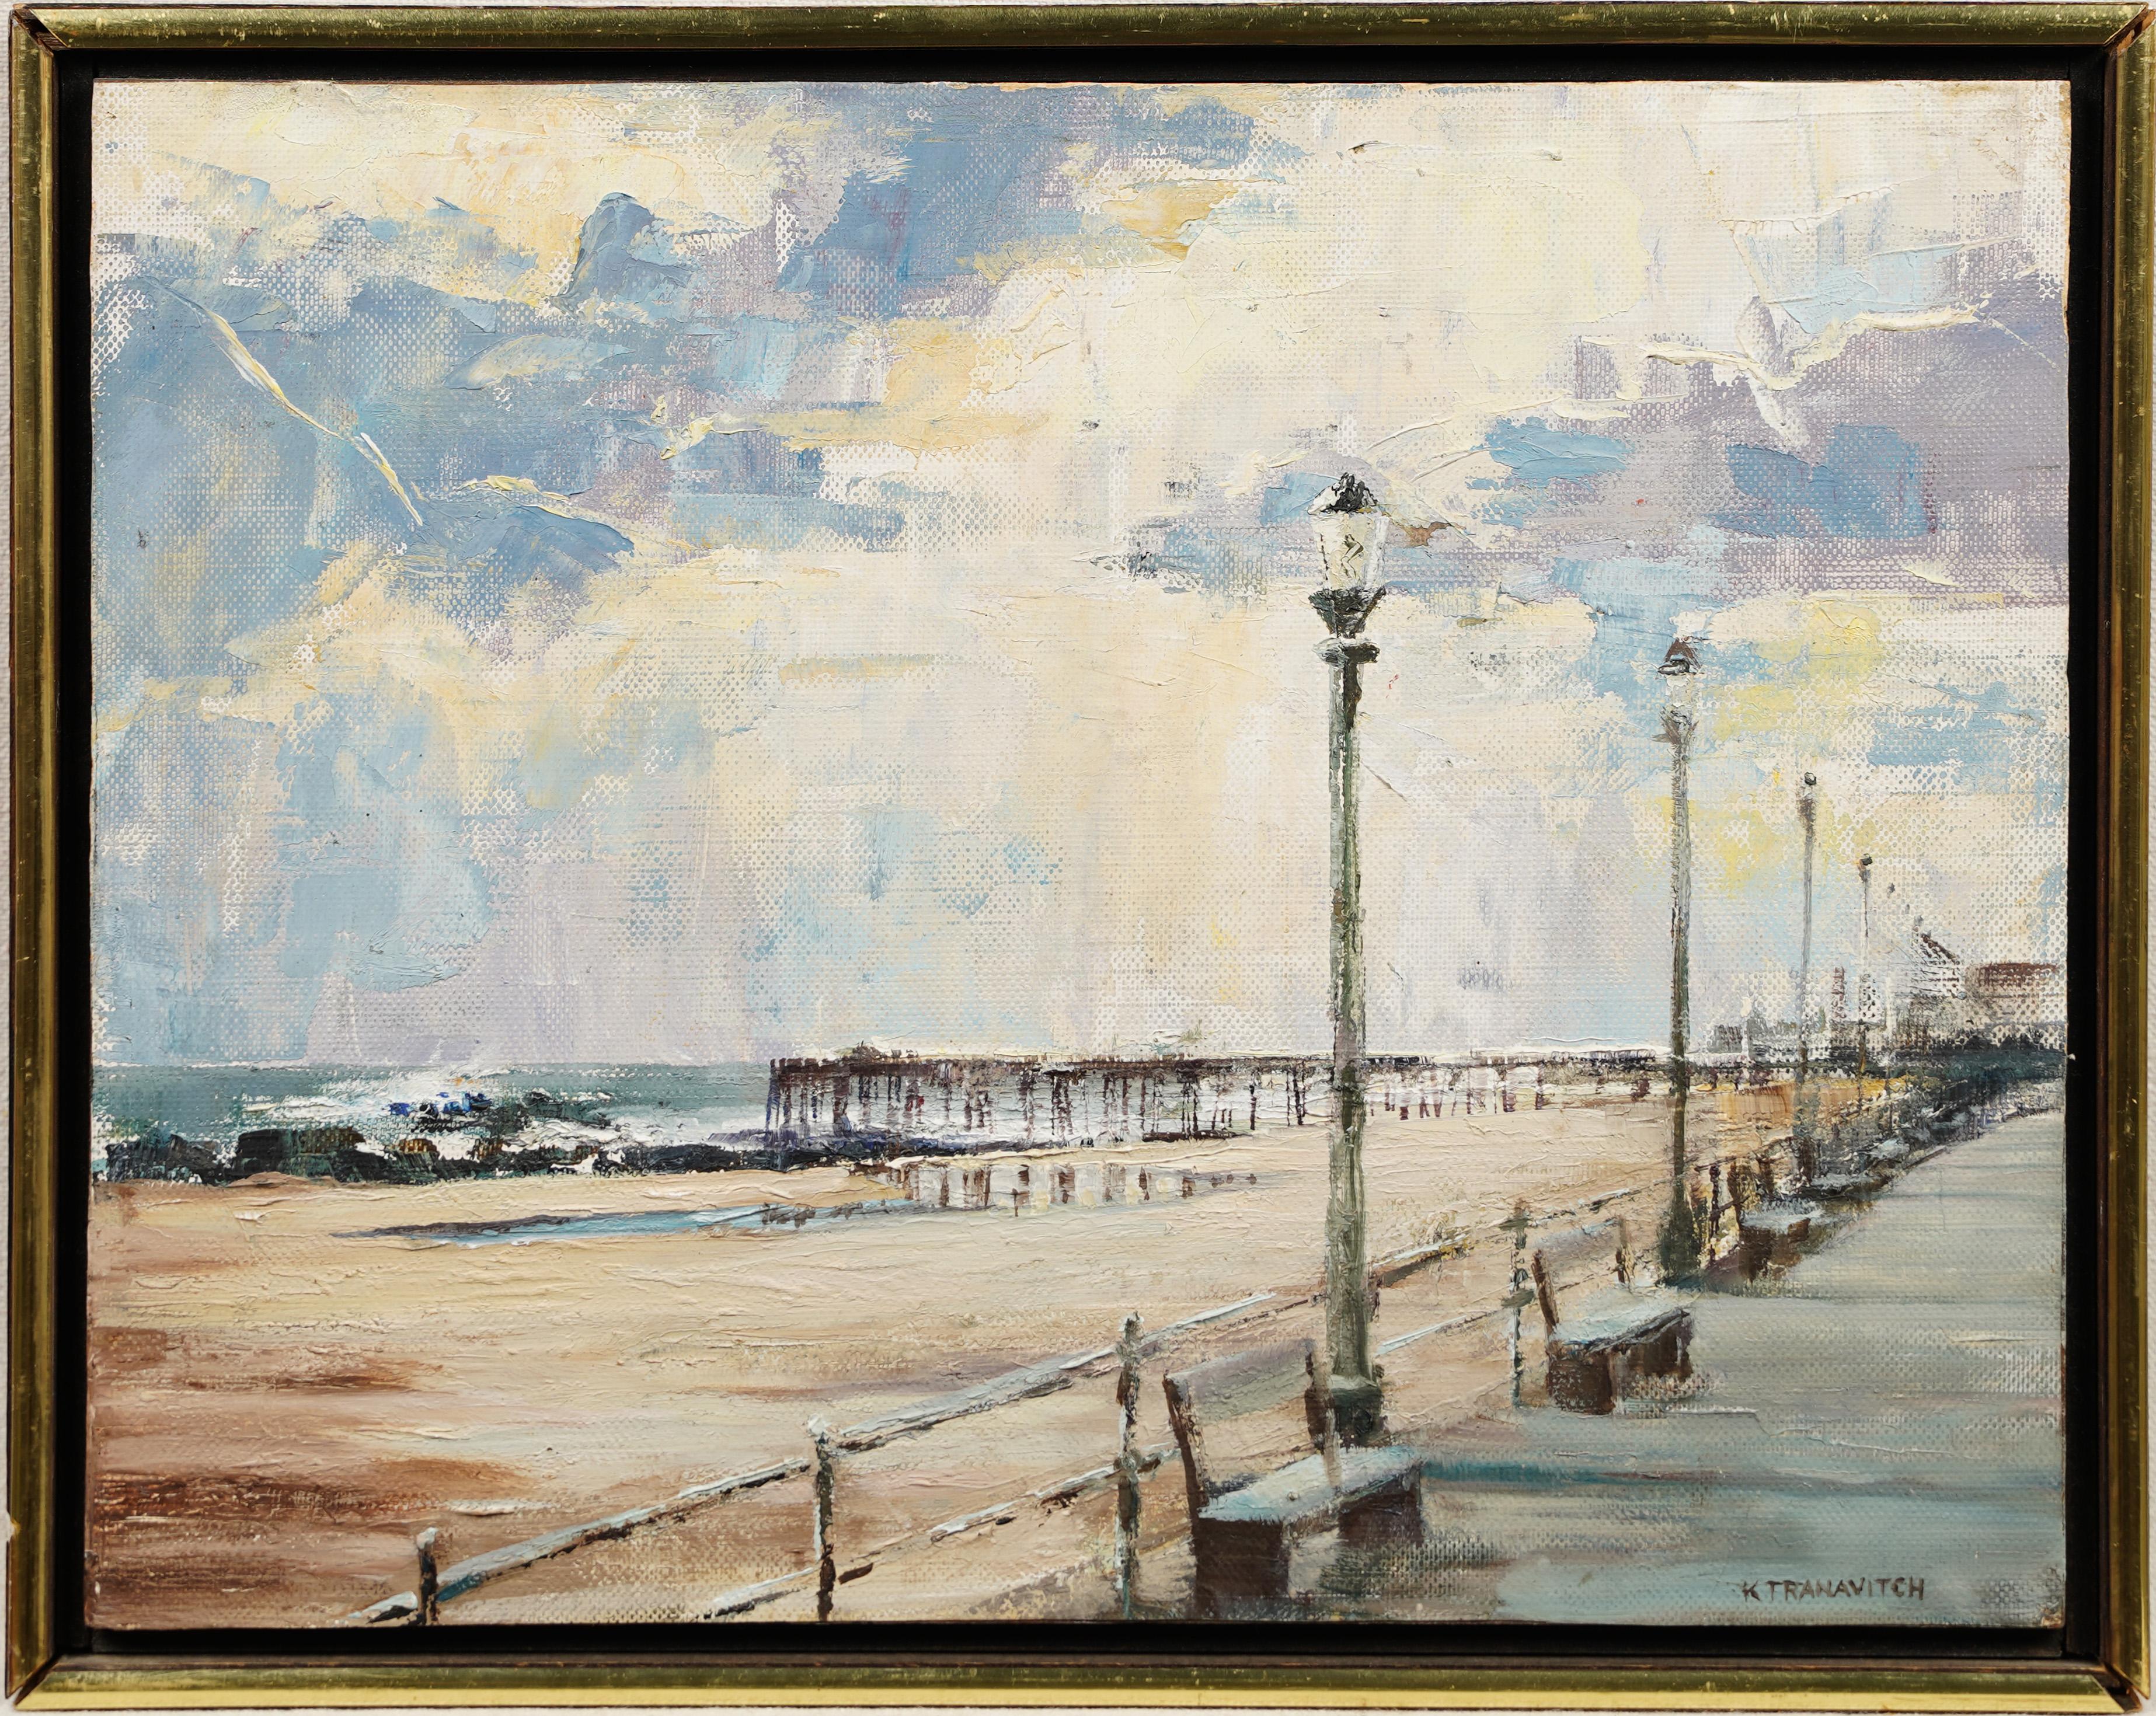 Vintage Framed American Beach Seascape Signed Original Oil Painting - Gray Landscape Painting by Unknown